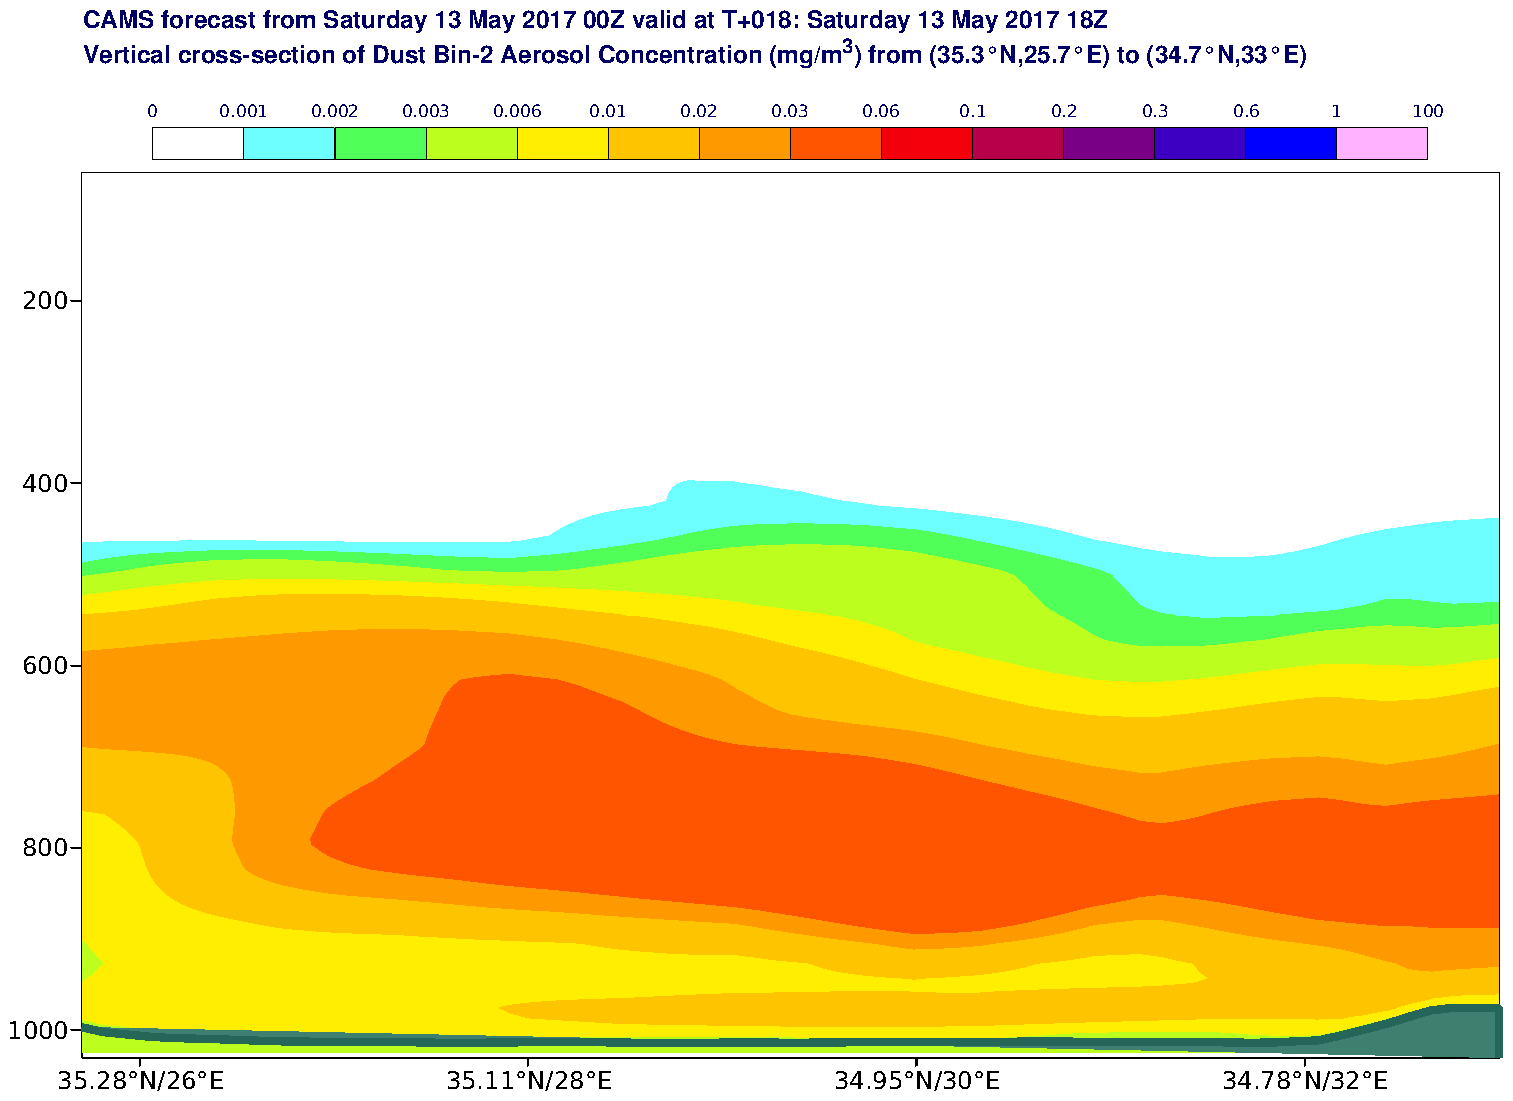 Vertical cross-section of Dust Bin-2 Aerosol Concentration (mg/m3) valid at T18 - 2017-05-13 18:00